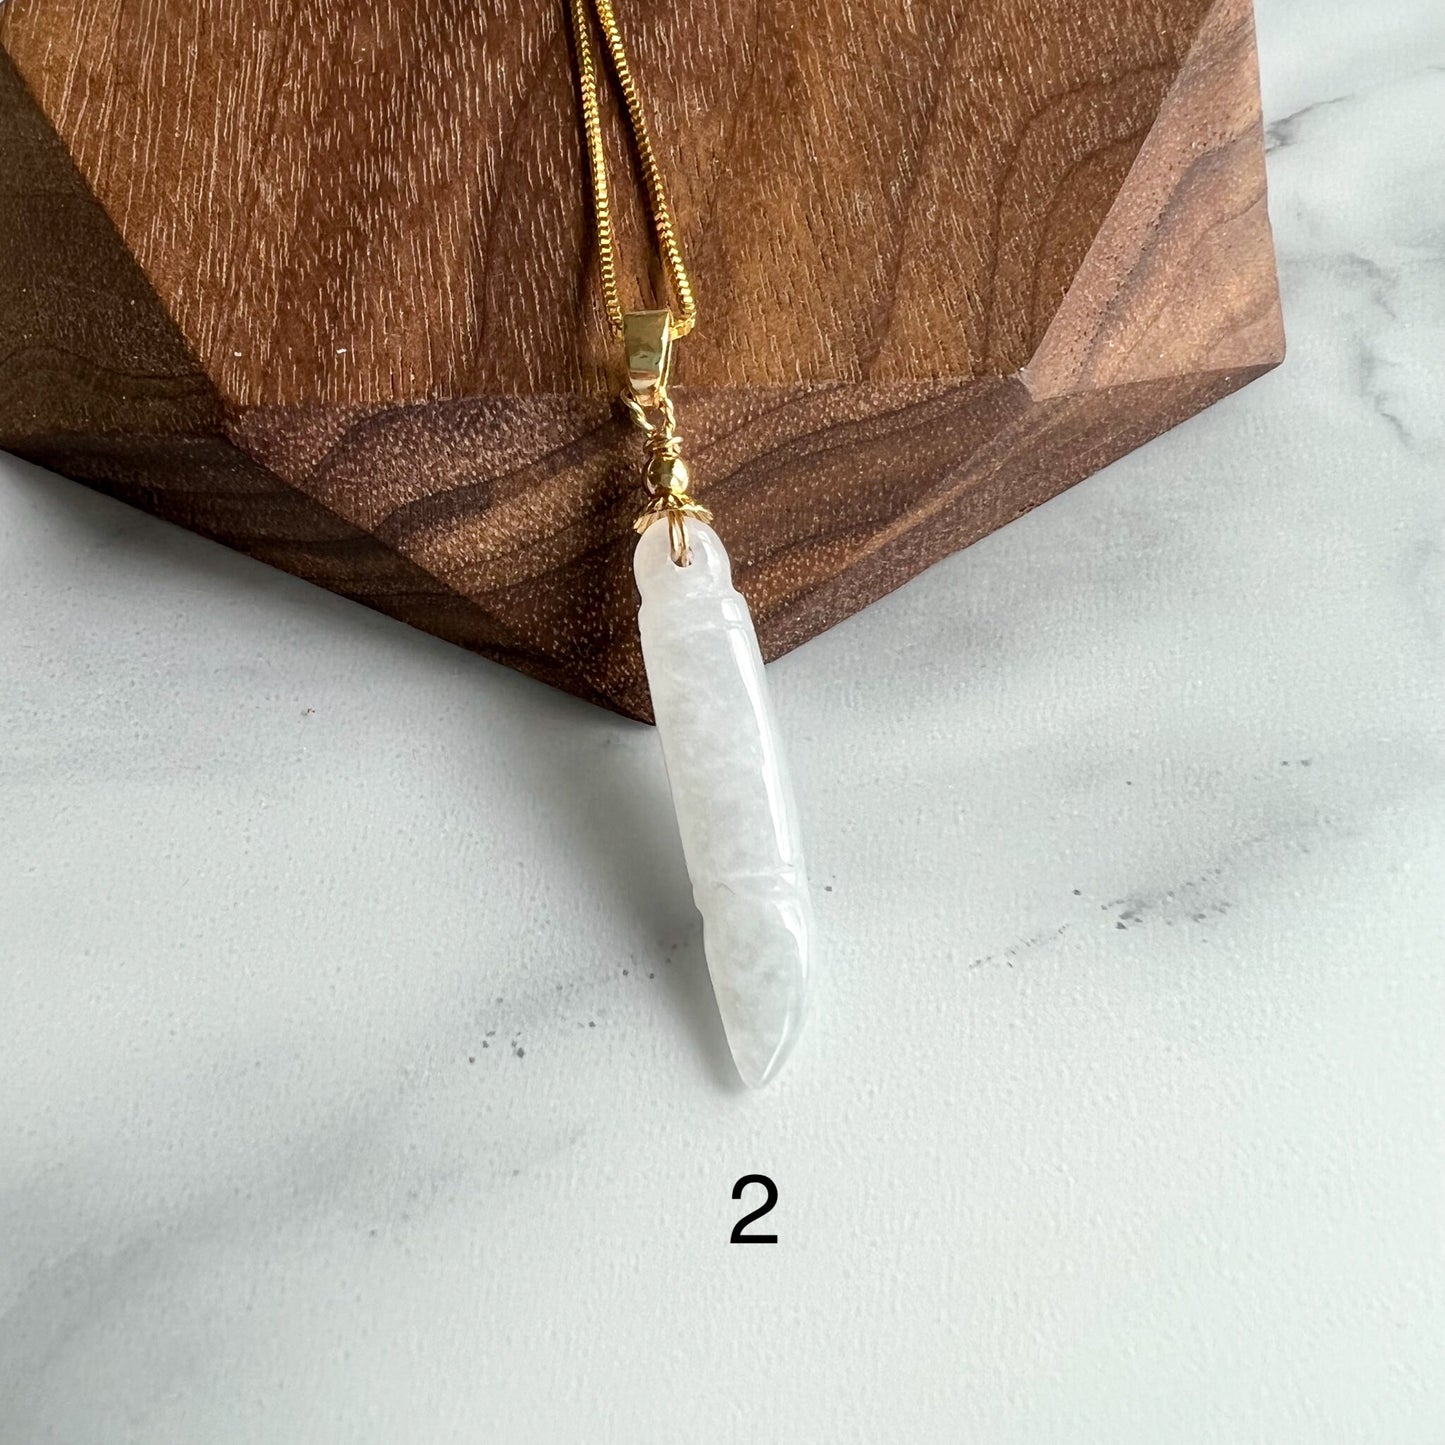 Icy Translucent Jade Paint Brush Pendant, Jadeite Jade, Gold Plated Hand Carved Pendant Necklace, XY-1221-1654986144 - AriaDesignCollection